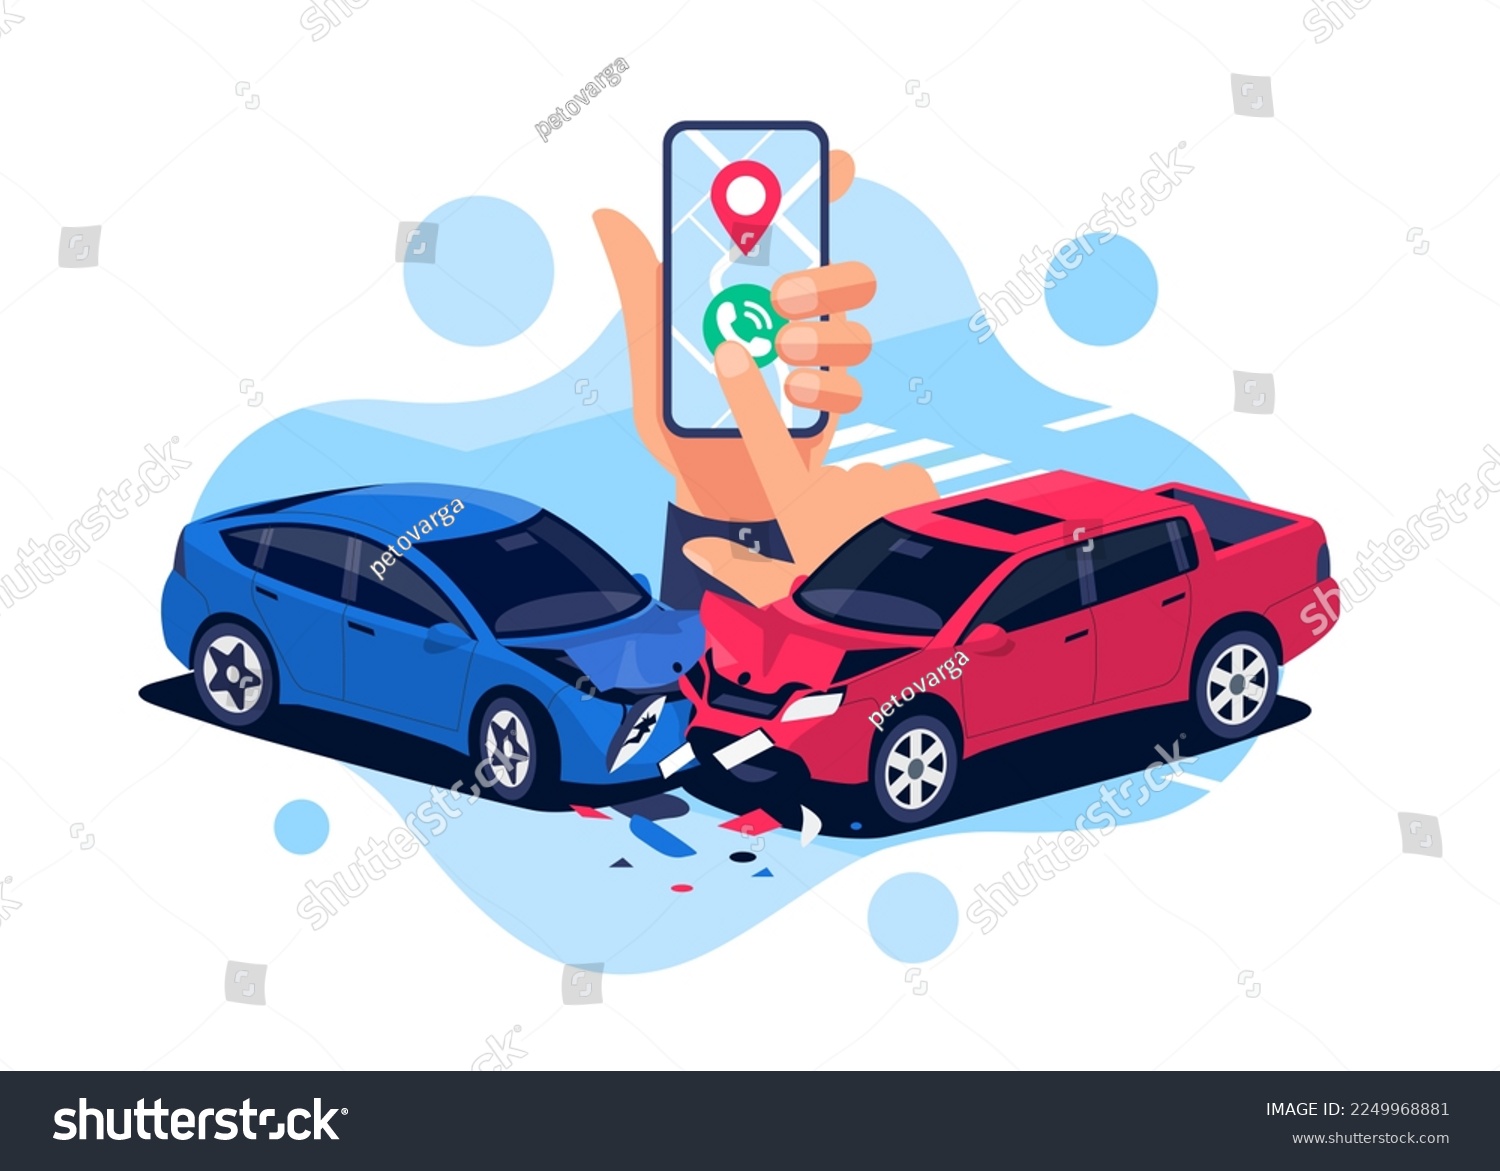 Car crash with urgent phone call. Smartphone in hand calling police help, insurance company. Two damaged vehicles in traffic accident collision on road, crossroad, street. Head-on hit. Isolated vector #2249968881